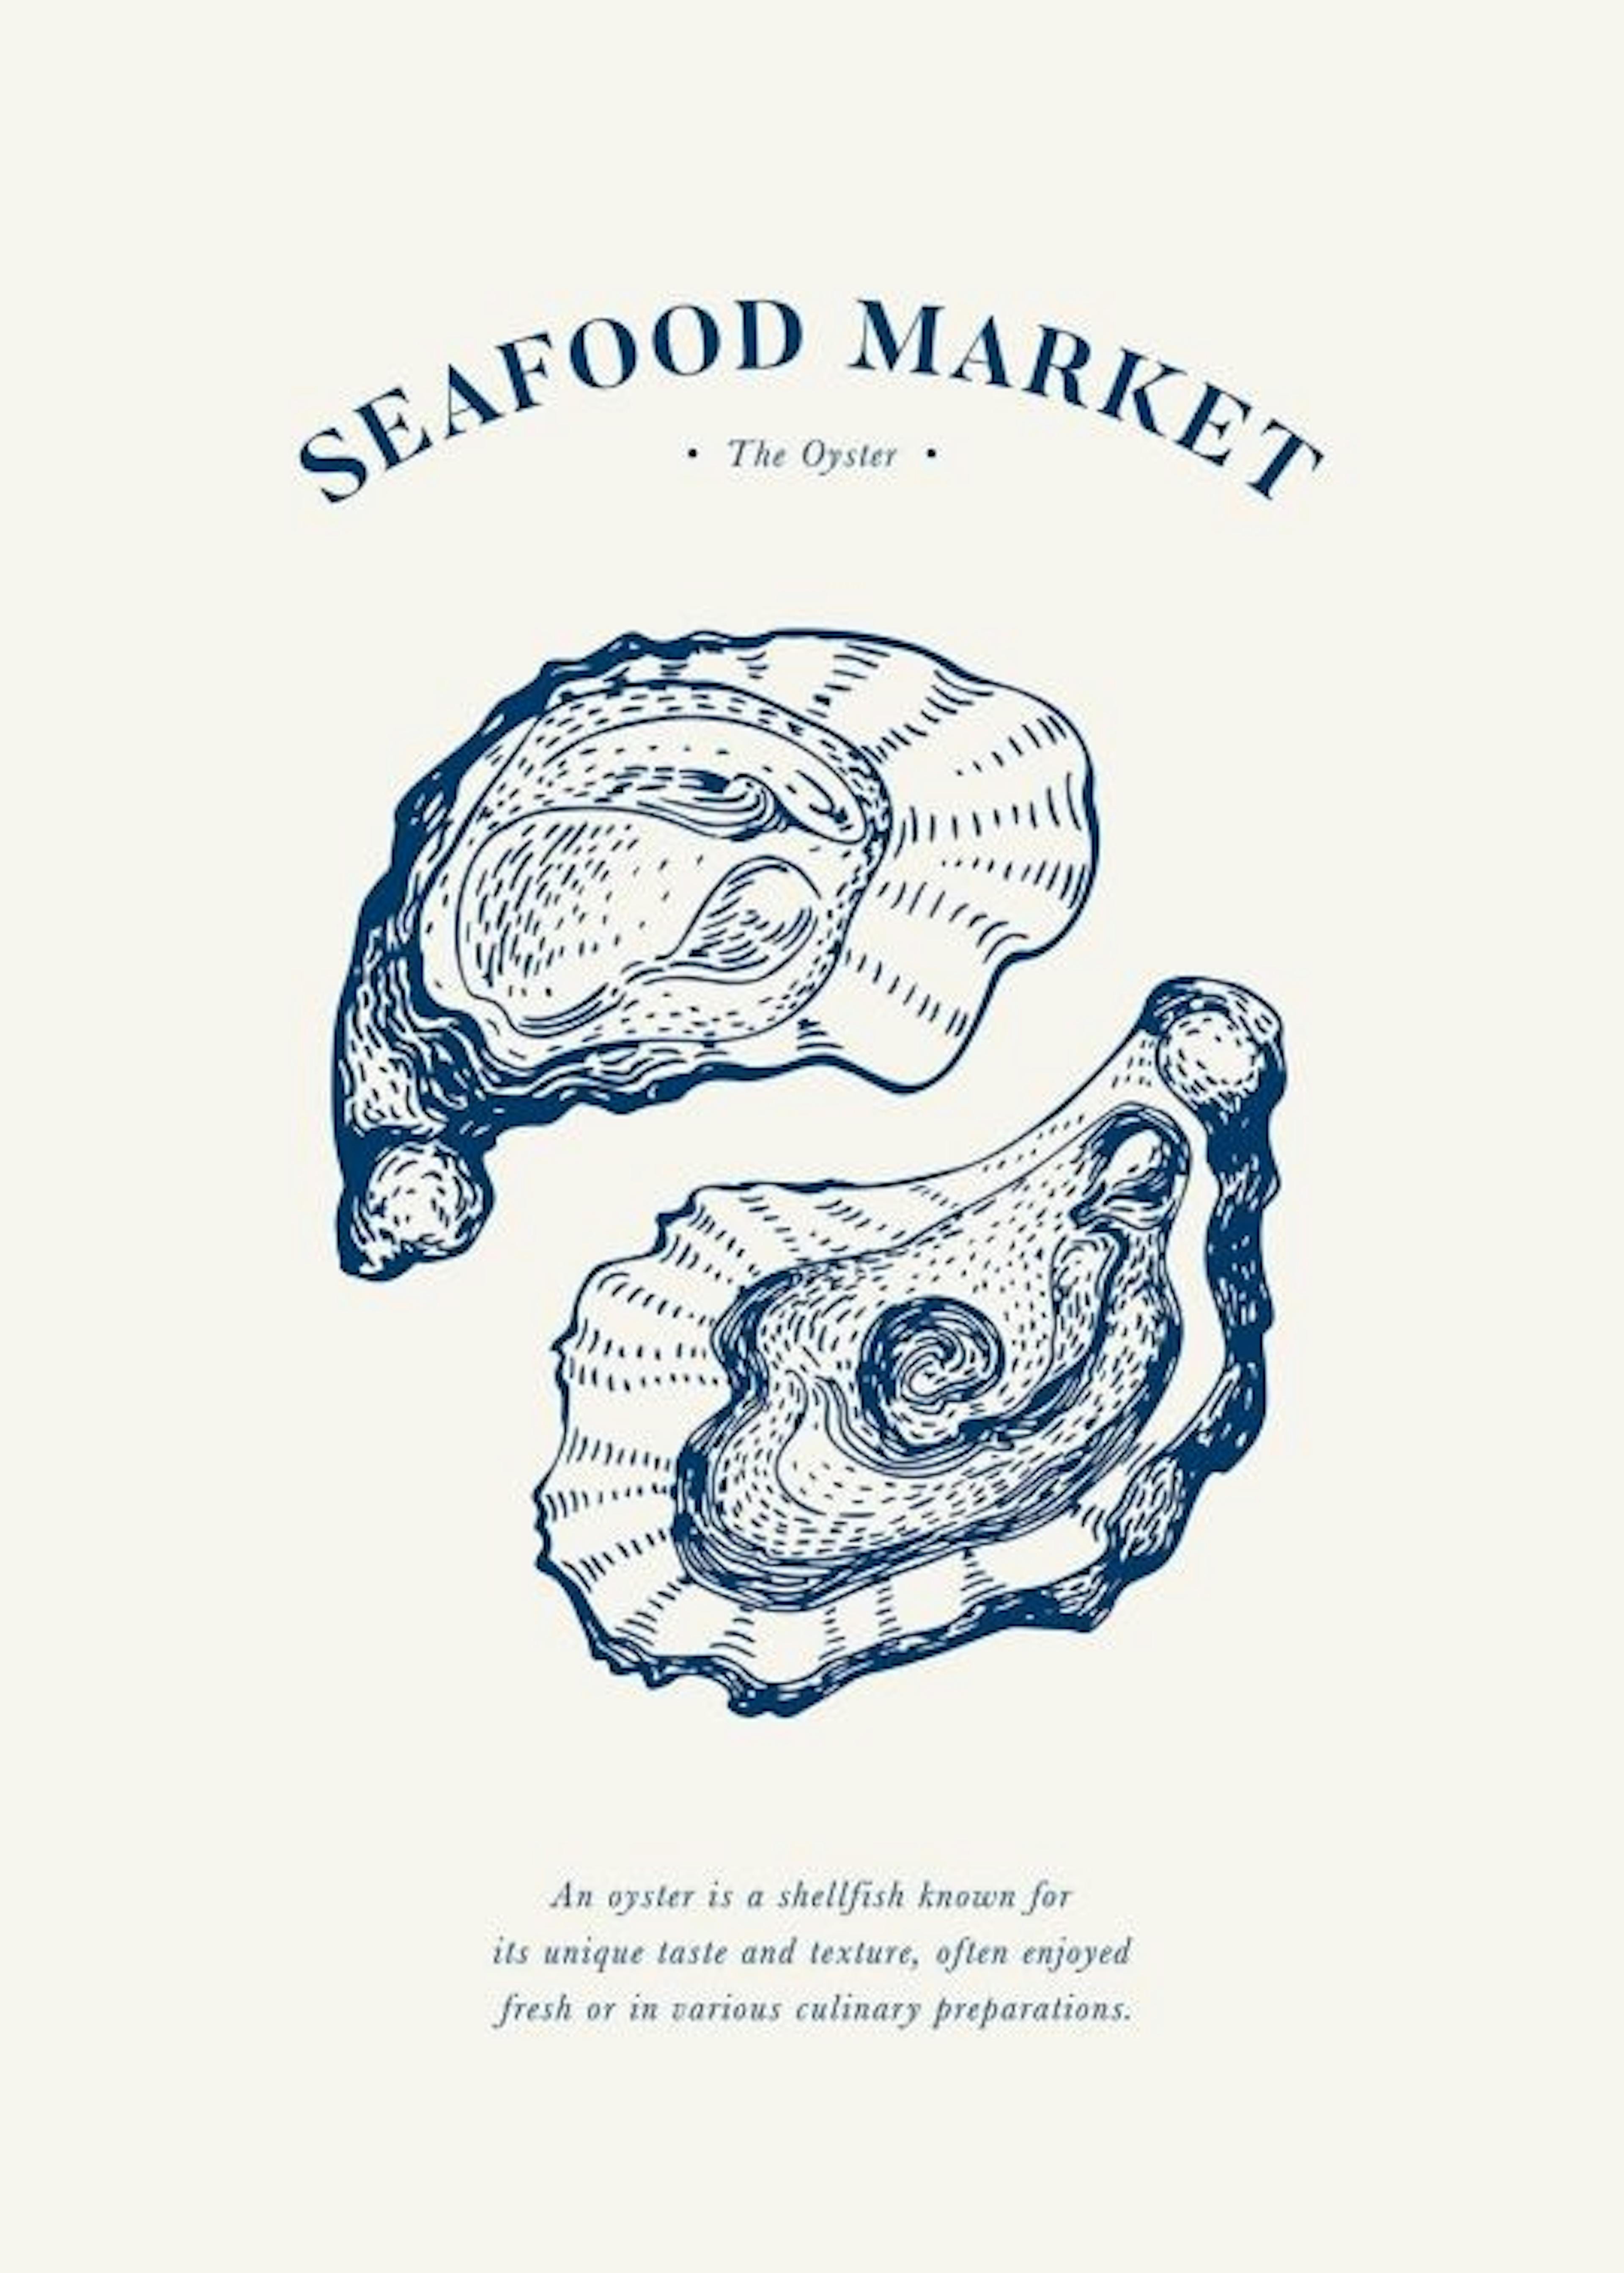 Seafood Market - The Oyster Print